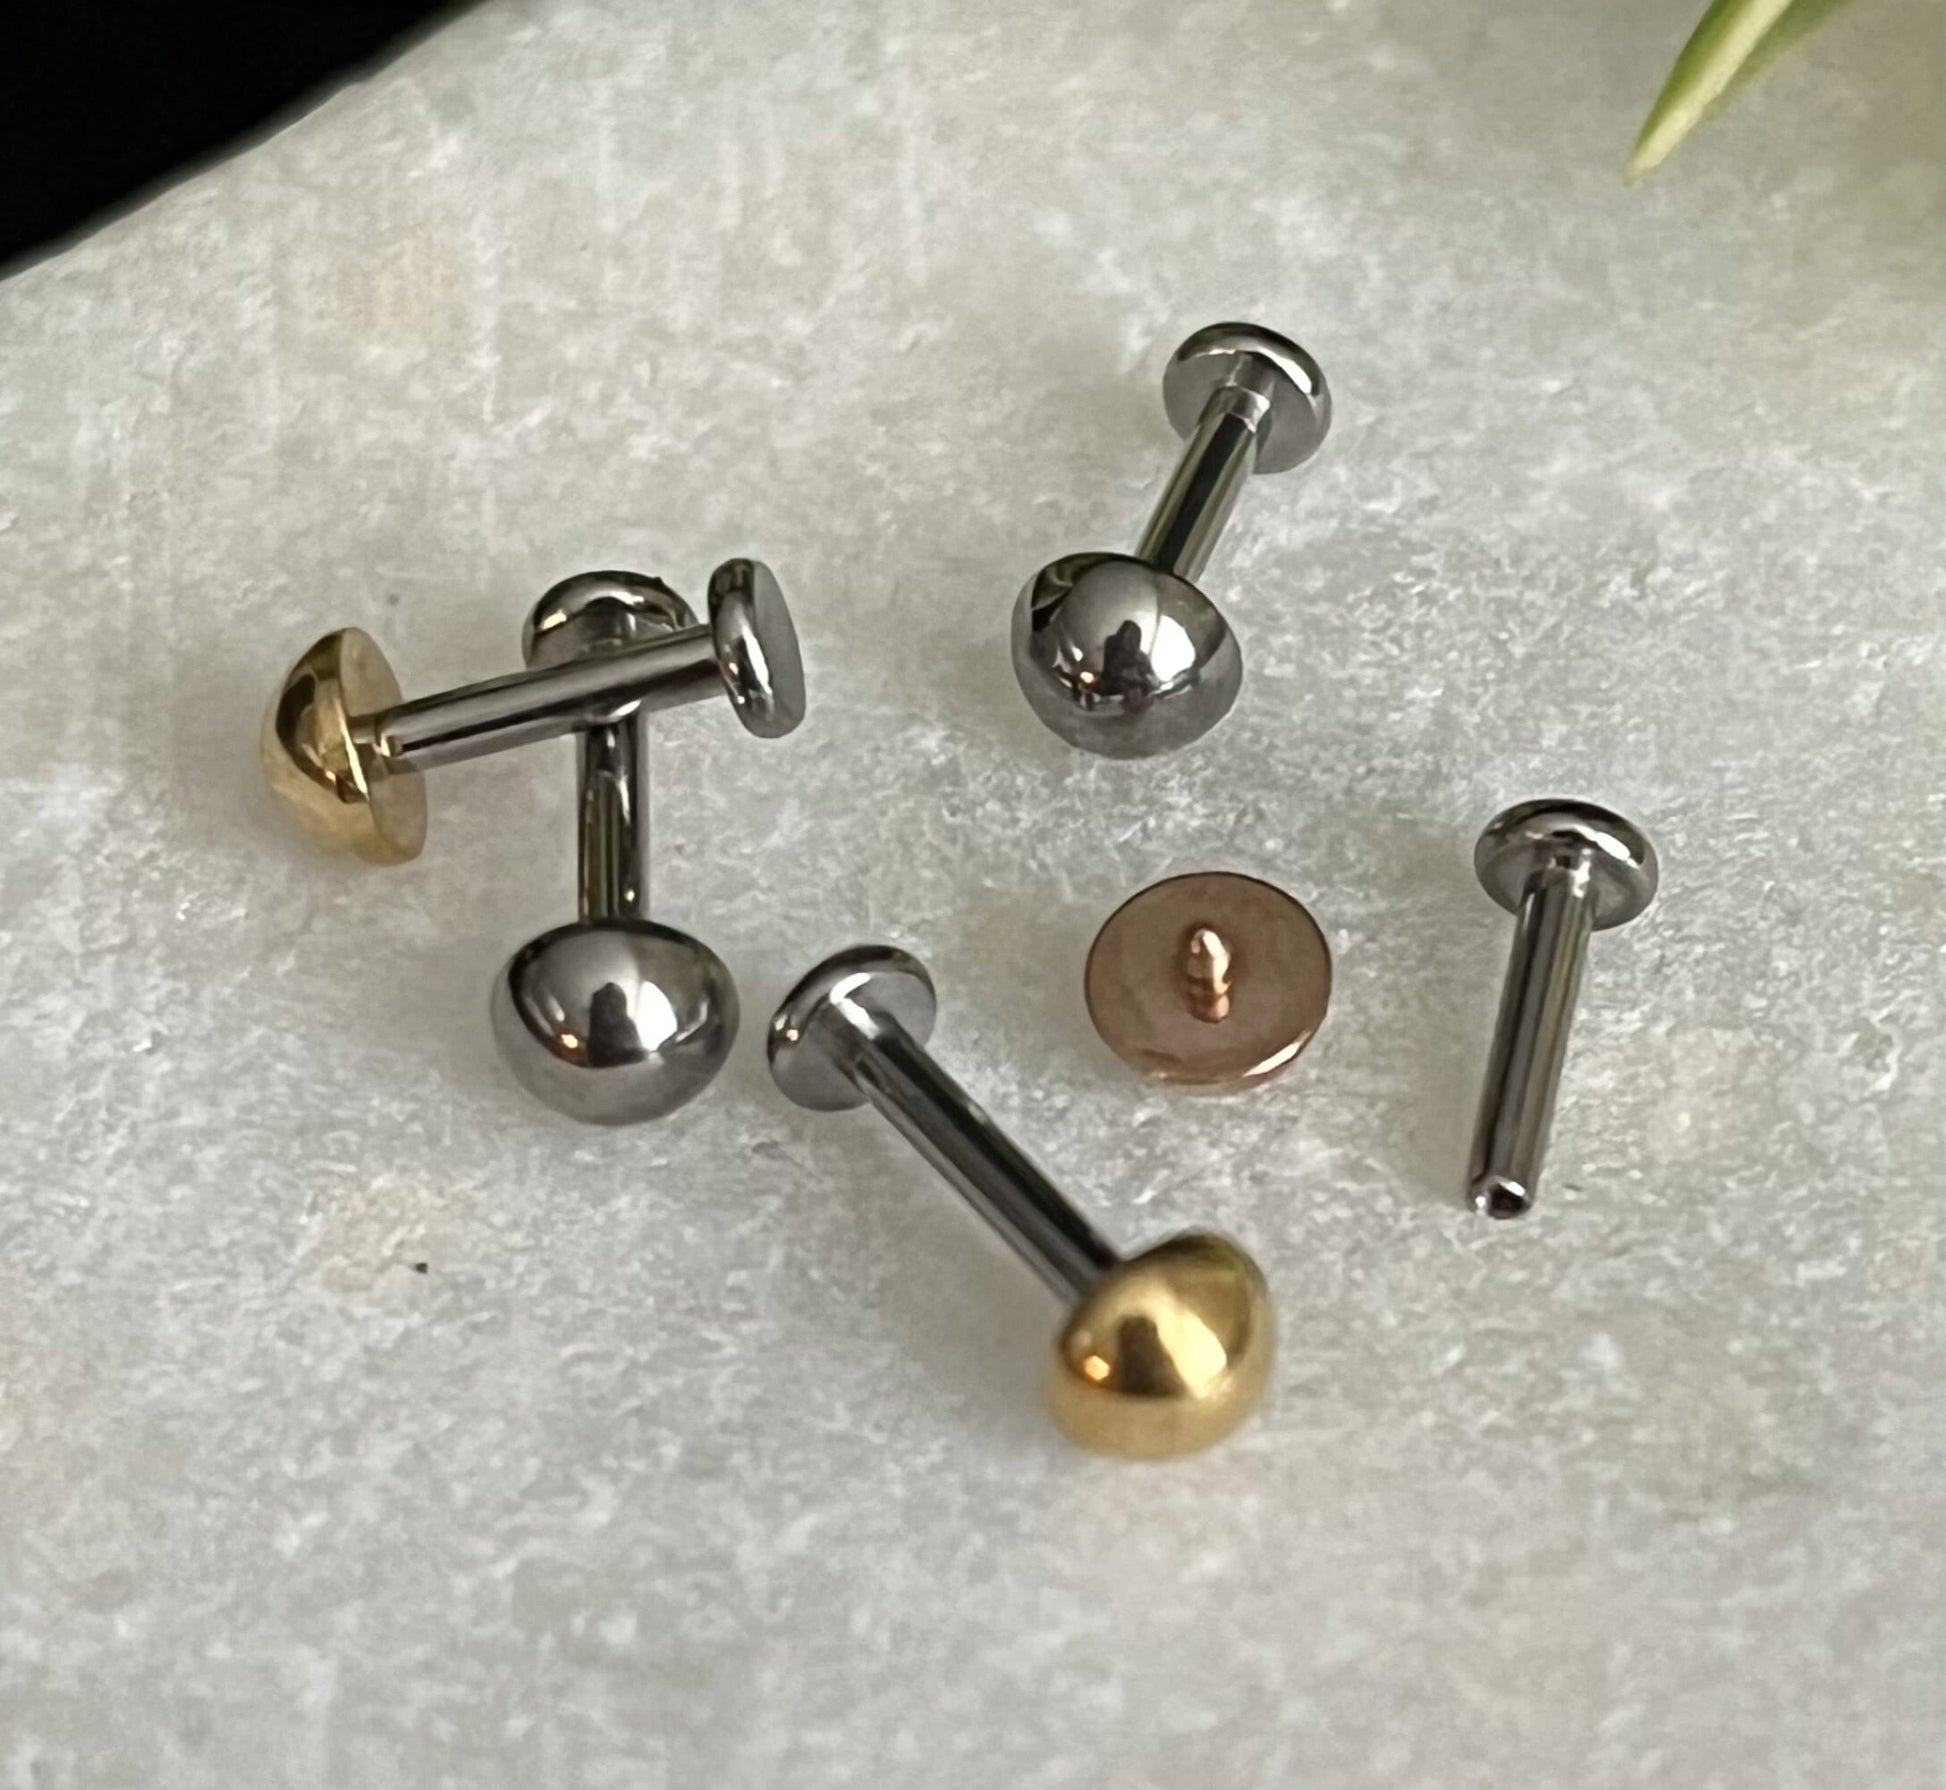 1 Piece Brilliant Titanium Dome Top Labret Monroe Stud Ring -16g - Wearable Diameter 6mm or 8mm - Gold, Rose Gold and Silver Available!